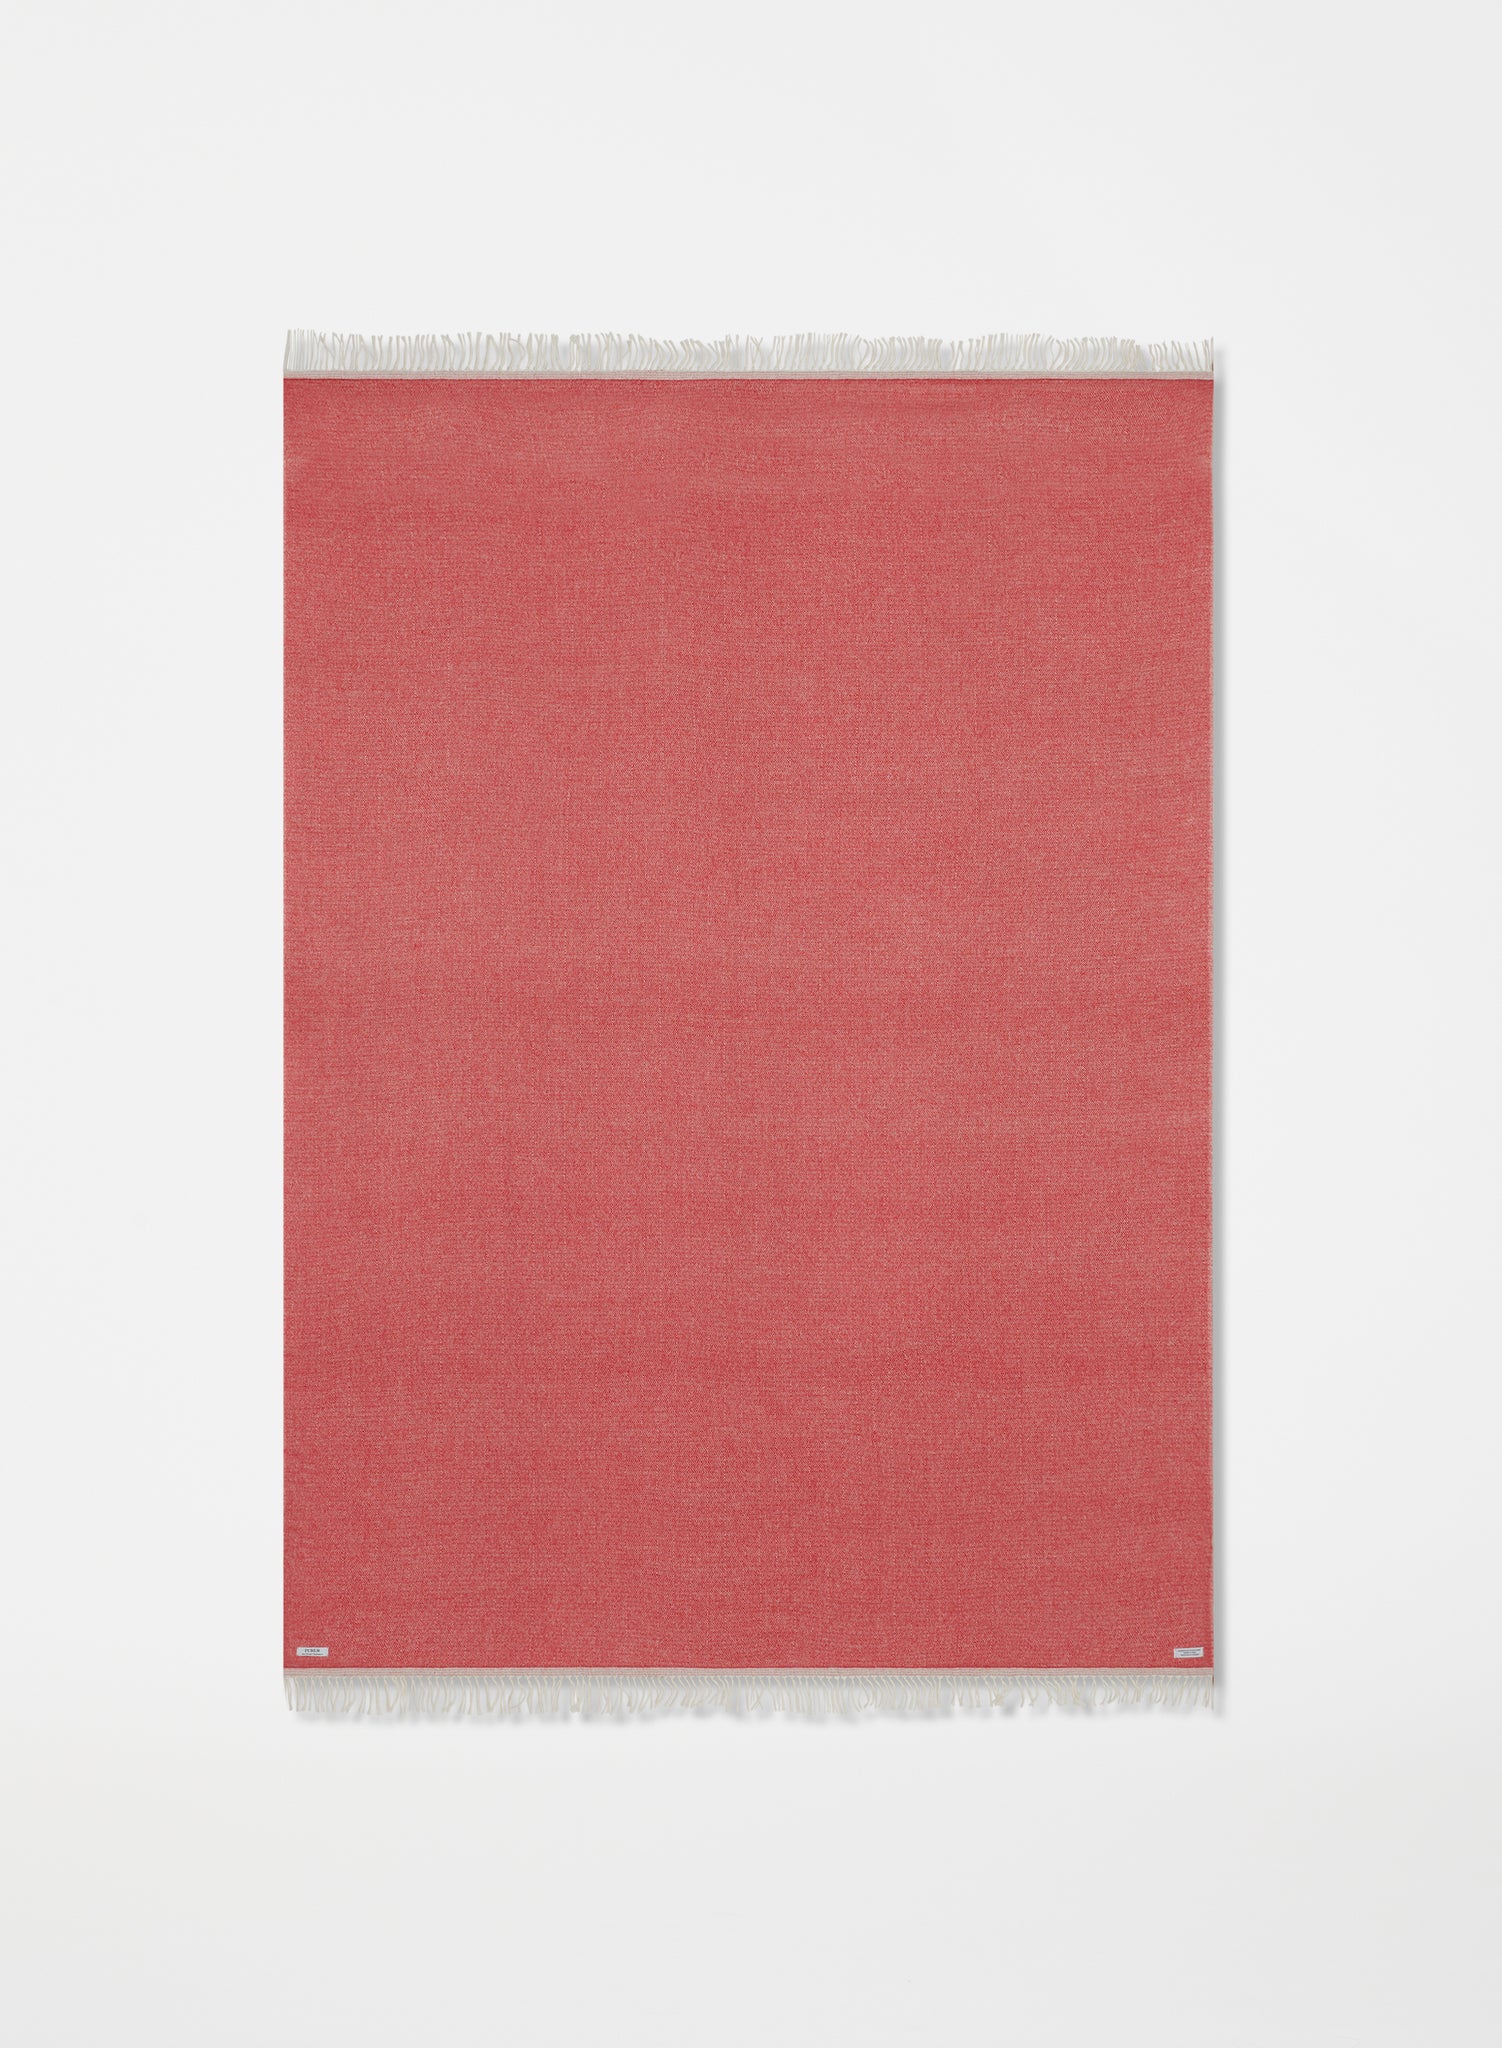 Altai Blanket | Red & Grey